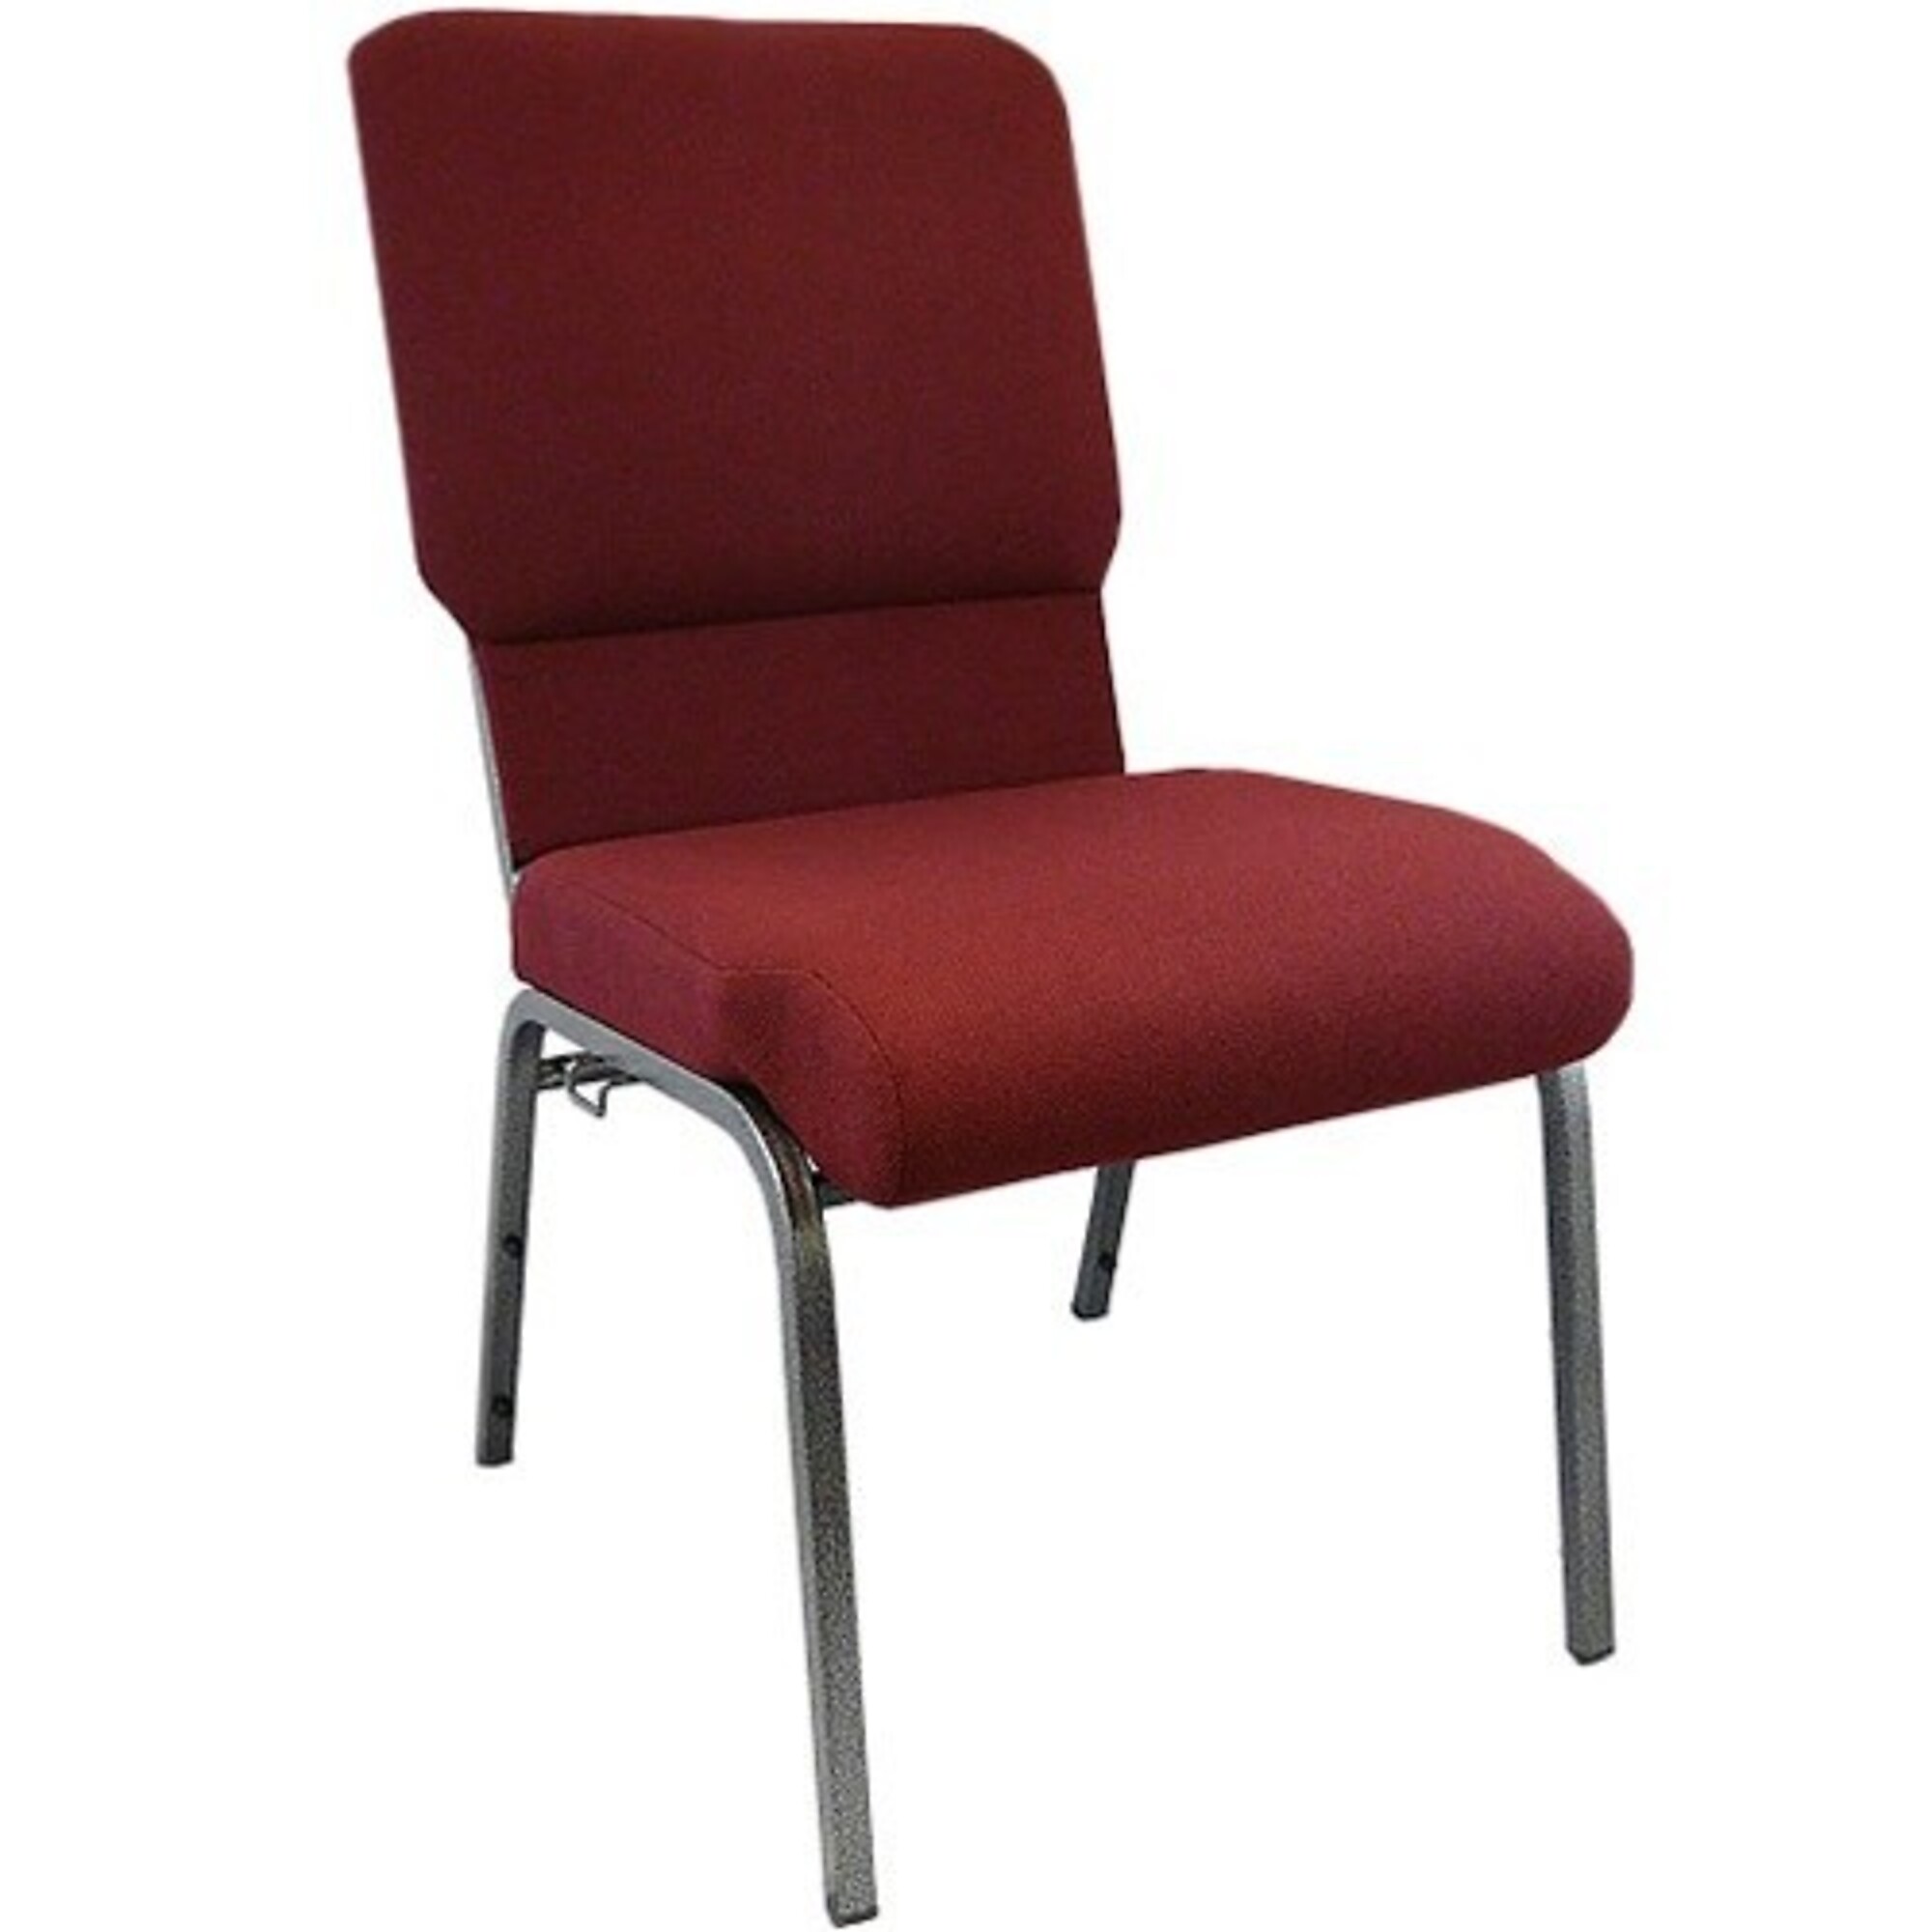 Flash Furniture, Maroon Church Chairs 18.5Inch Wide, Primary Color Burgundy, Included (qty.) 1, Model PCHT185104